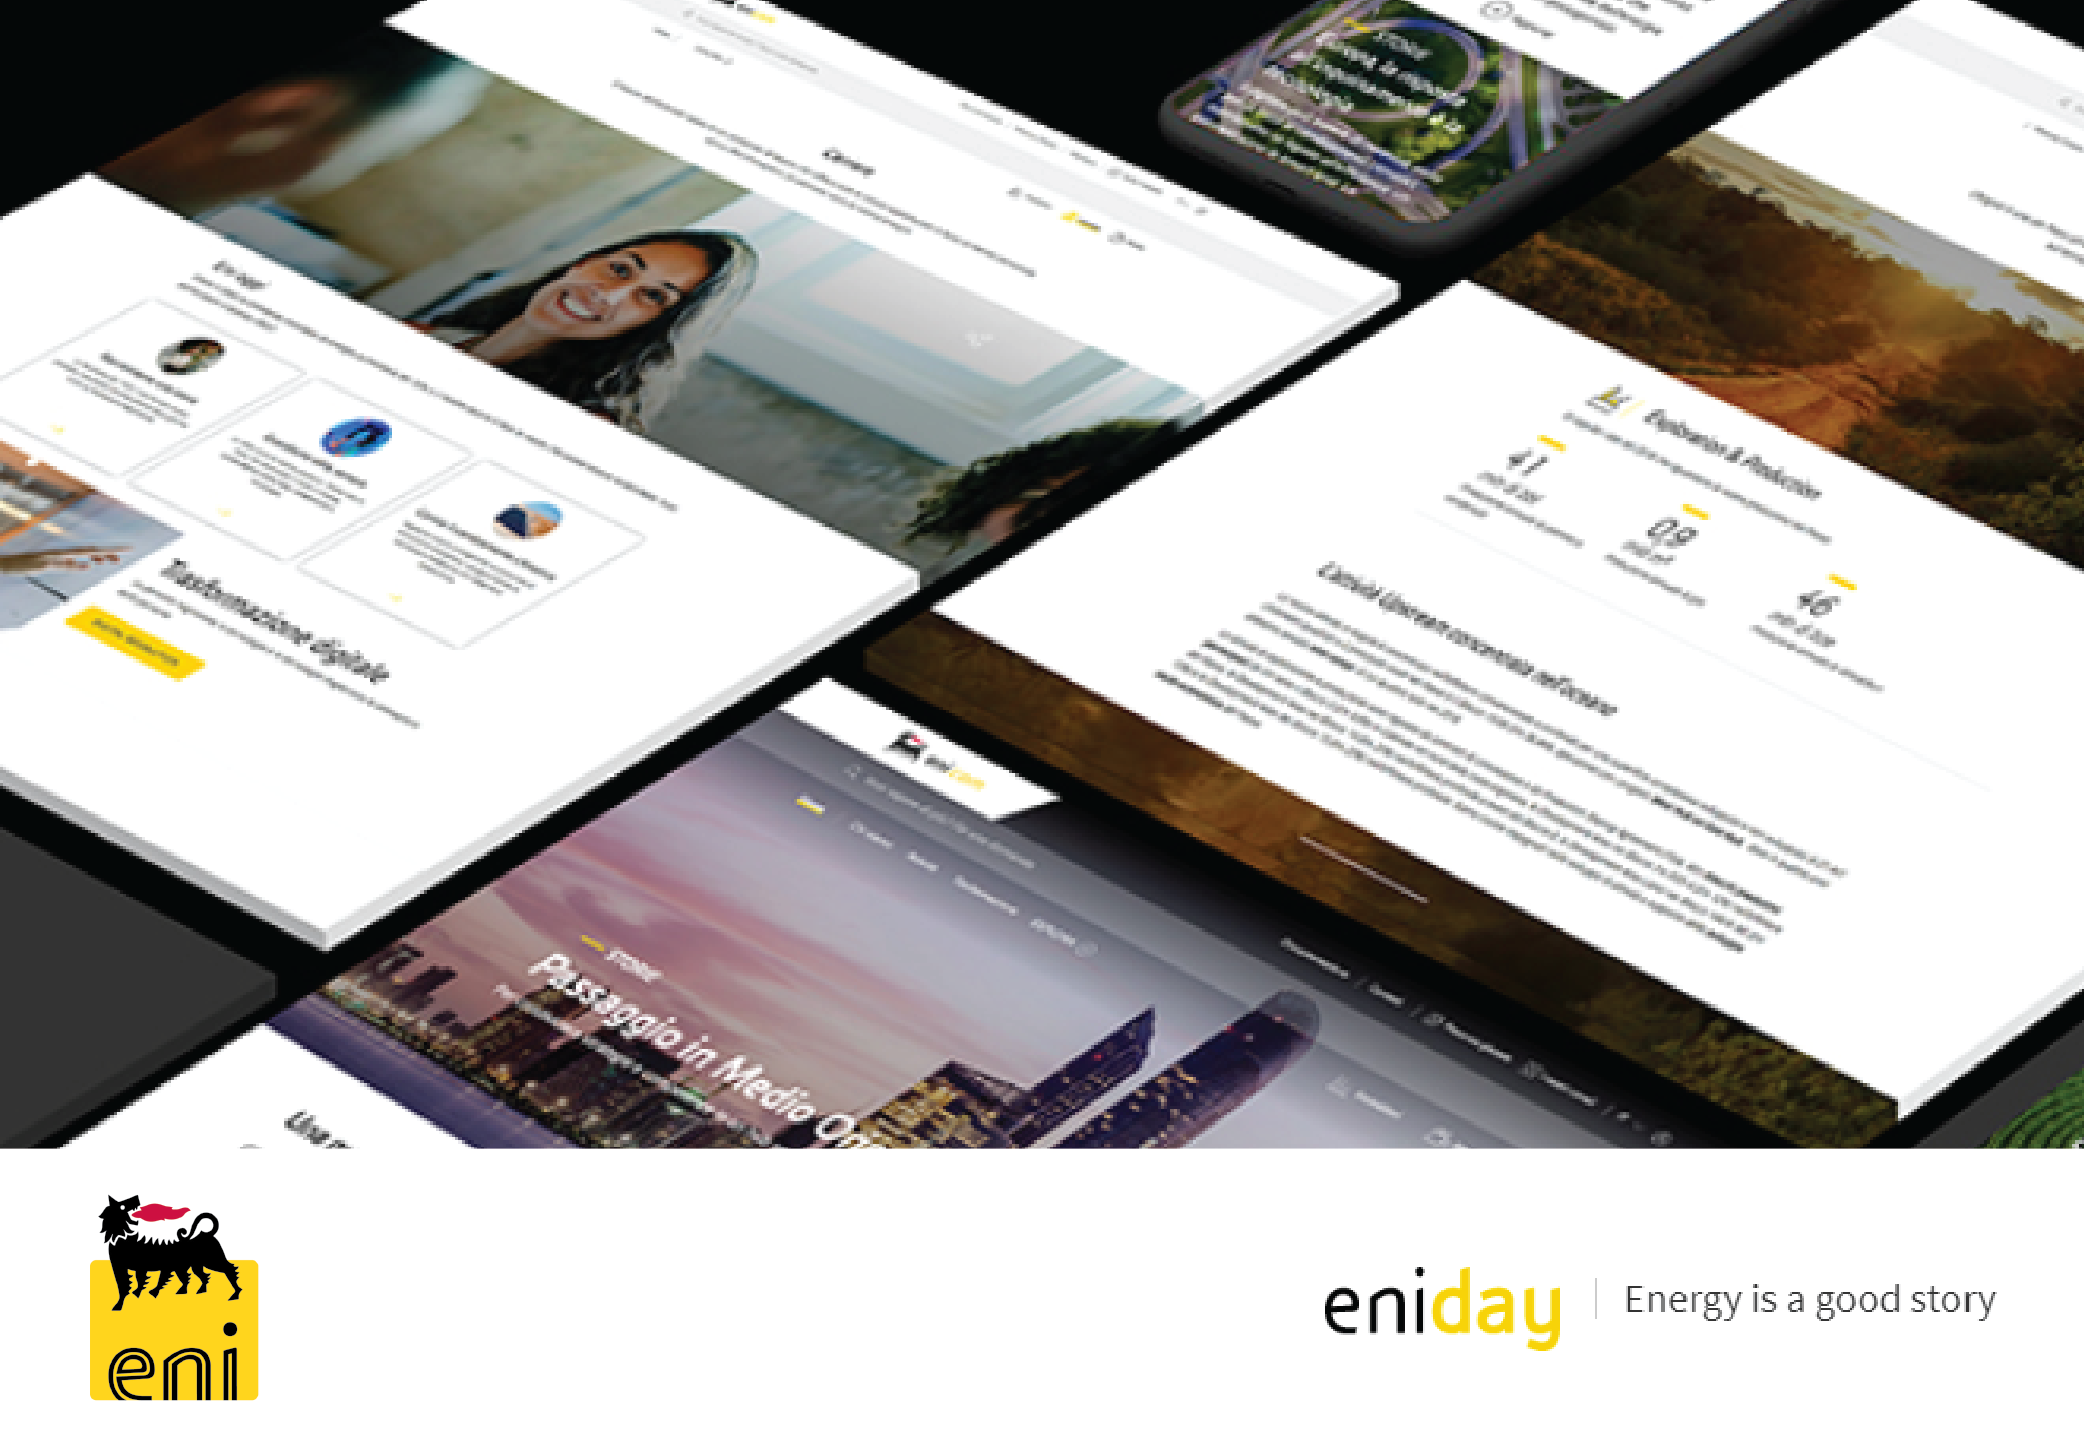 See Eni's innovative new website